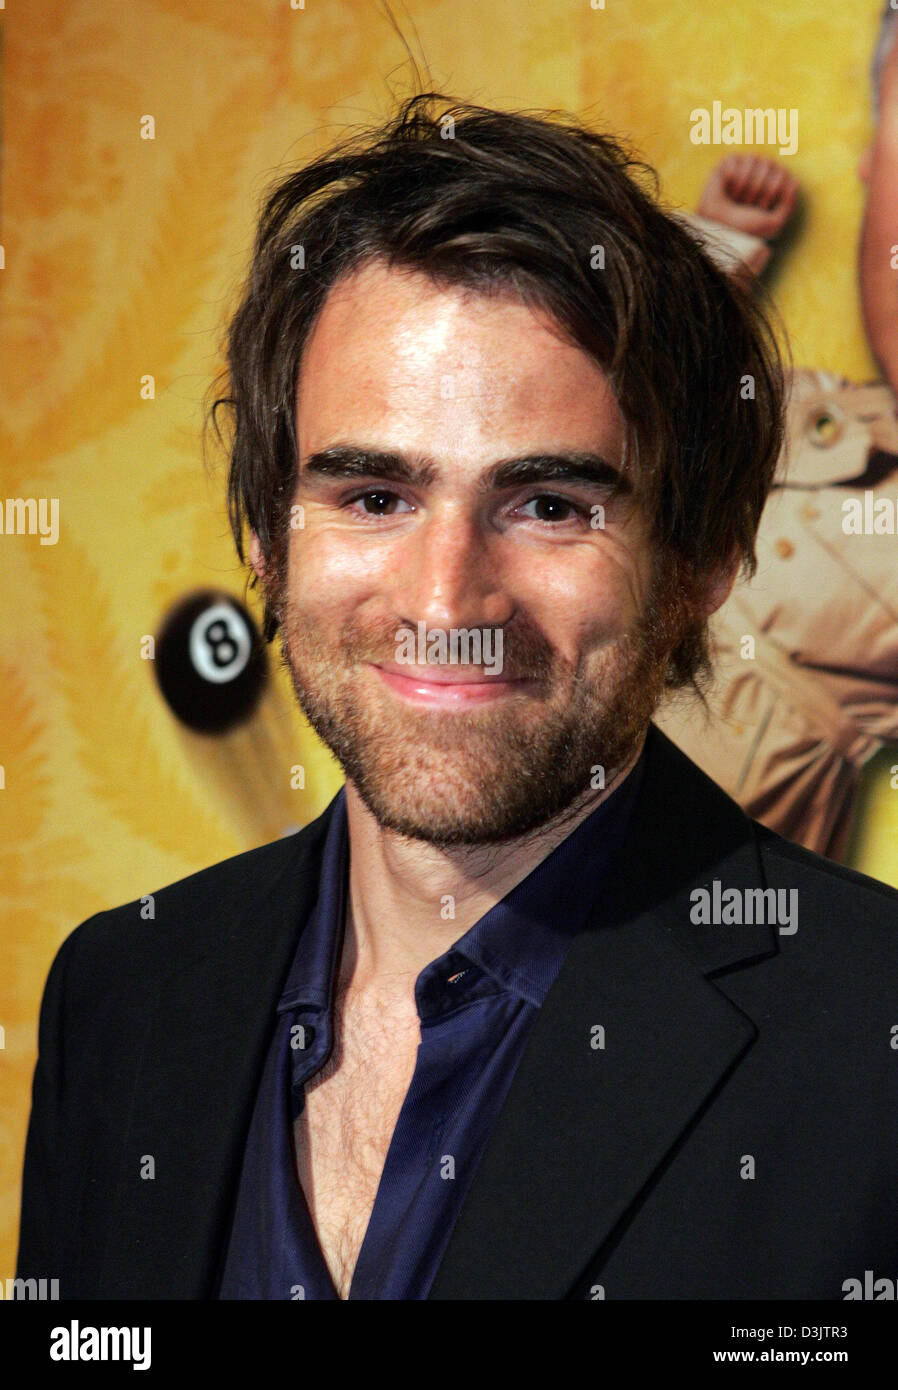 (dpa) - German actor Sebastian Blomberg smiles as he arrives to the premiere of his new film  'Alles auf Zucker' (everything on sugar) in Cologne, Germany, 5 January 2005. The film is being released in Germany on 6 January 2005. Stock Photo